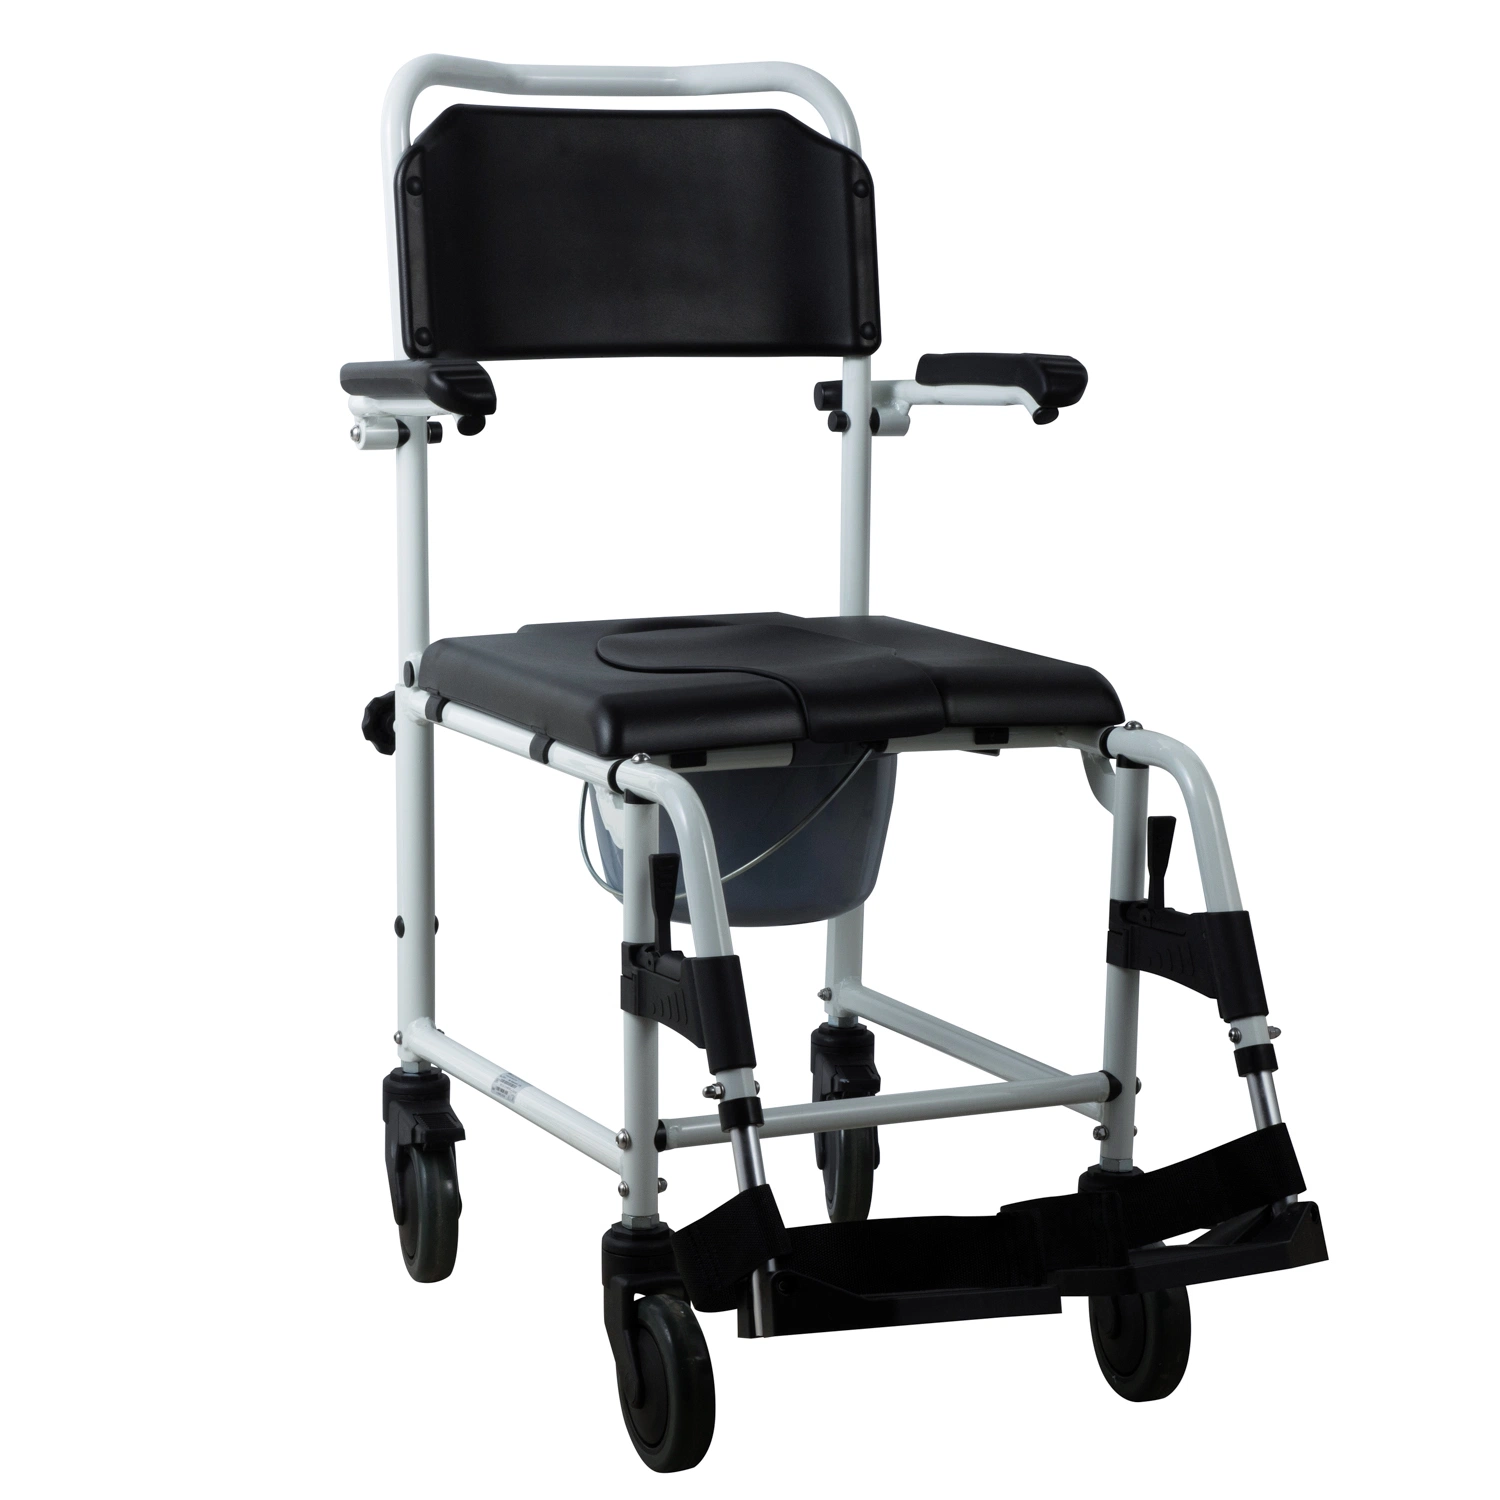 Commode Chair Aluminum Chair Shower Chair 2 in One